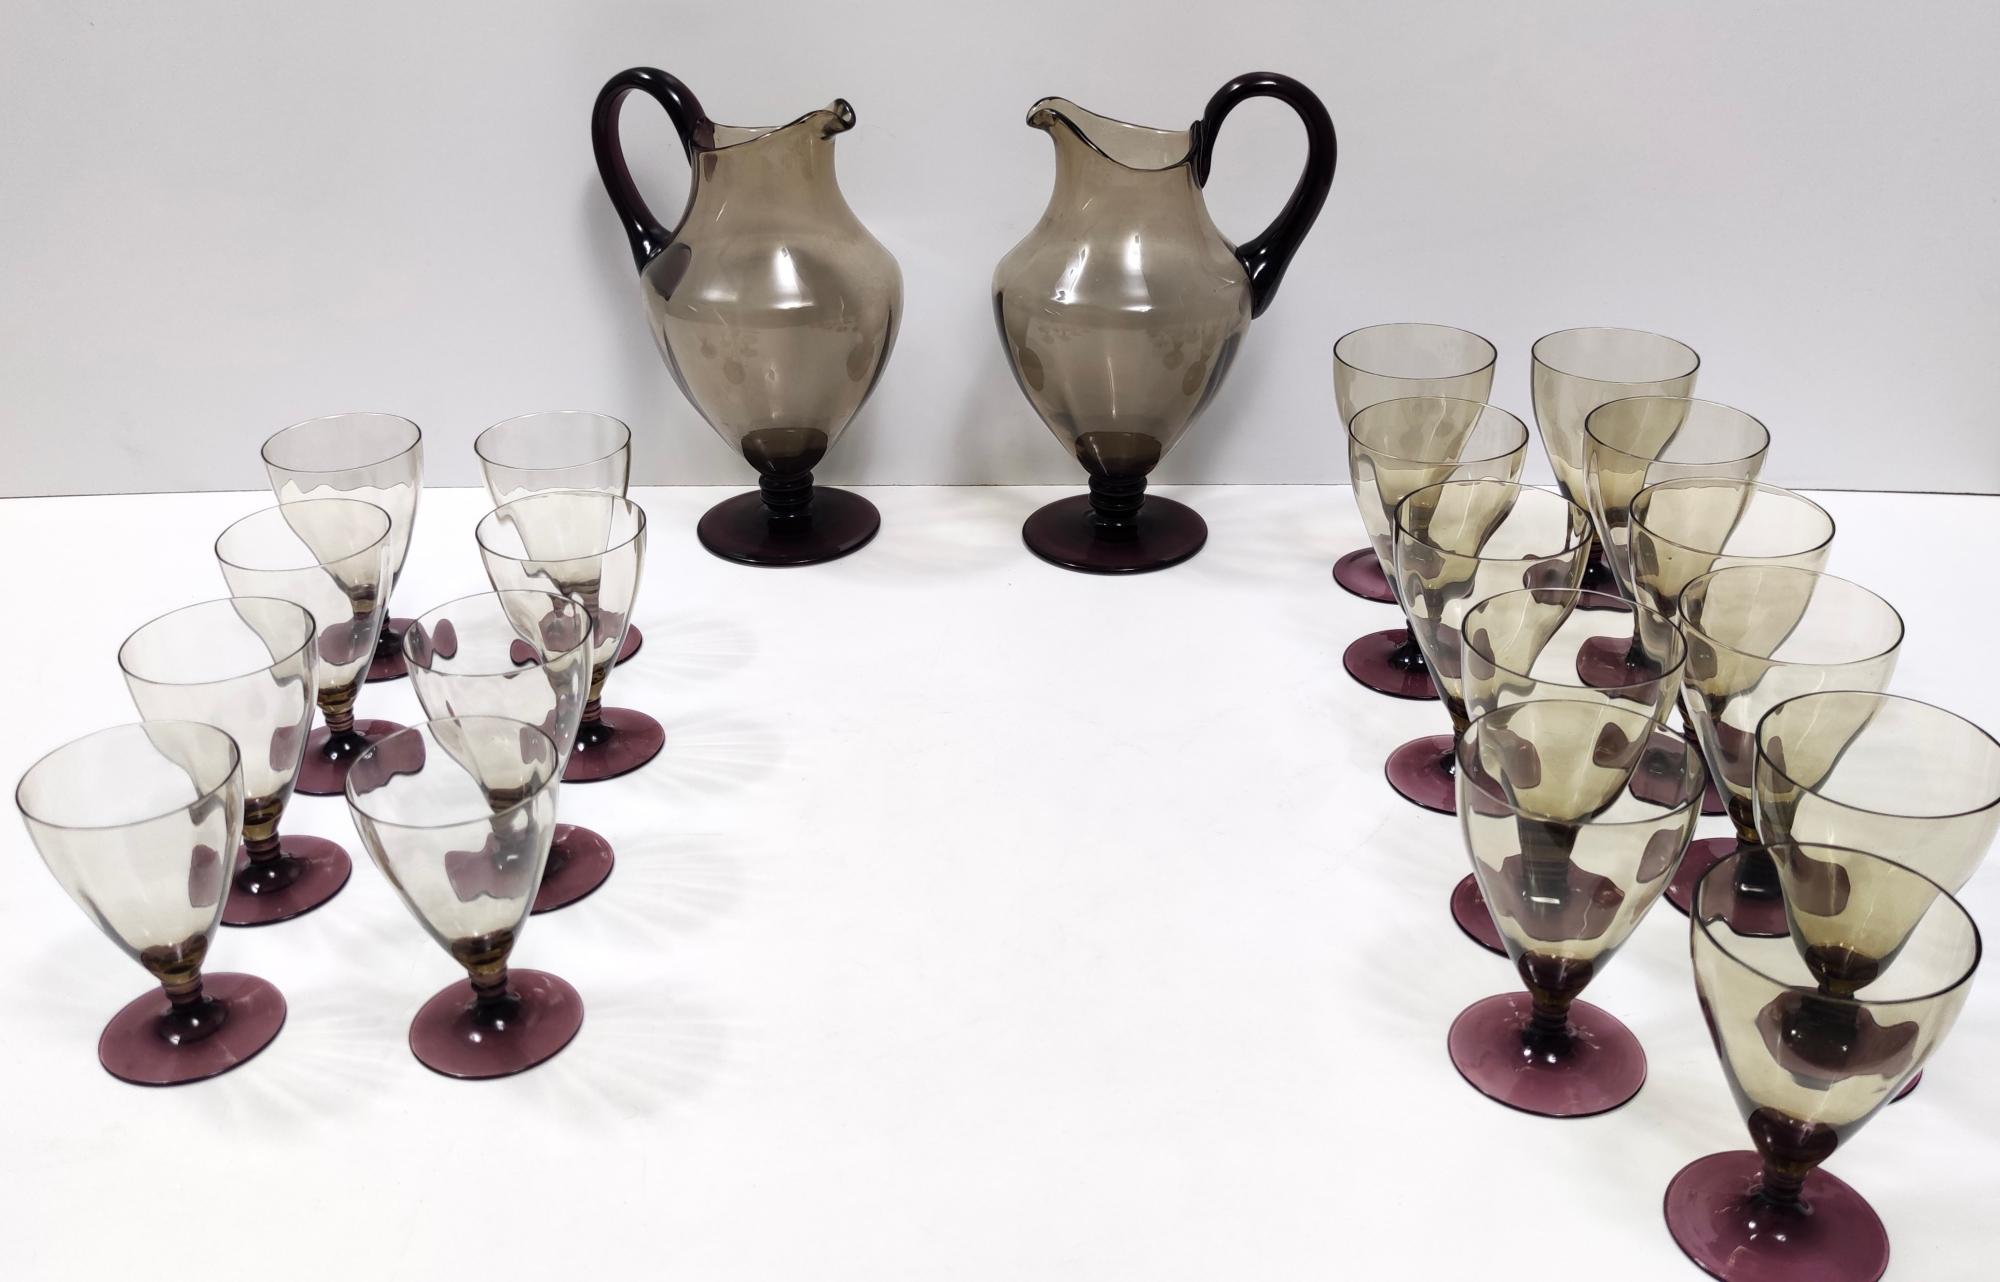 Made in Italy, 1920s.
Made in Murano glass. 
This set has two pitchers, 11 water glasses and 11 wine glasses.
It is a vintage set, therefore it might show slight traces of use, but it can be considered as in excellent original condition and ready